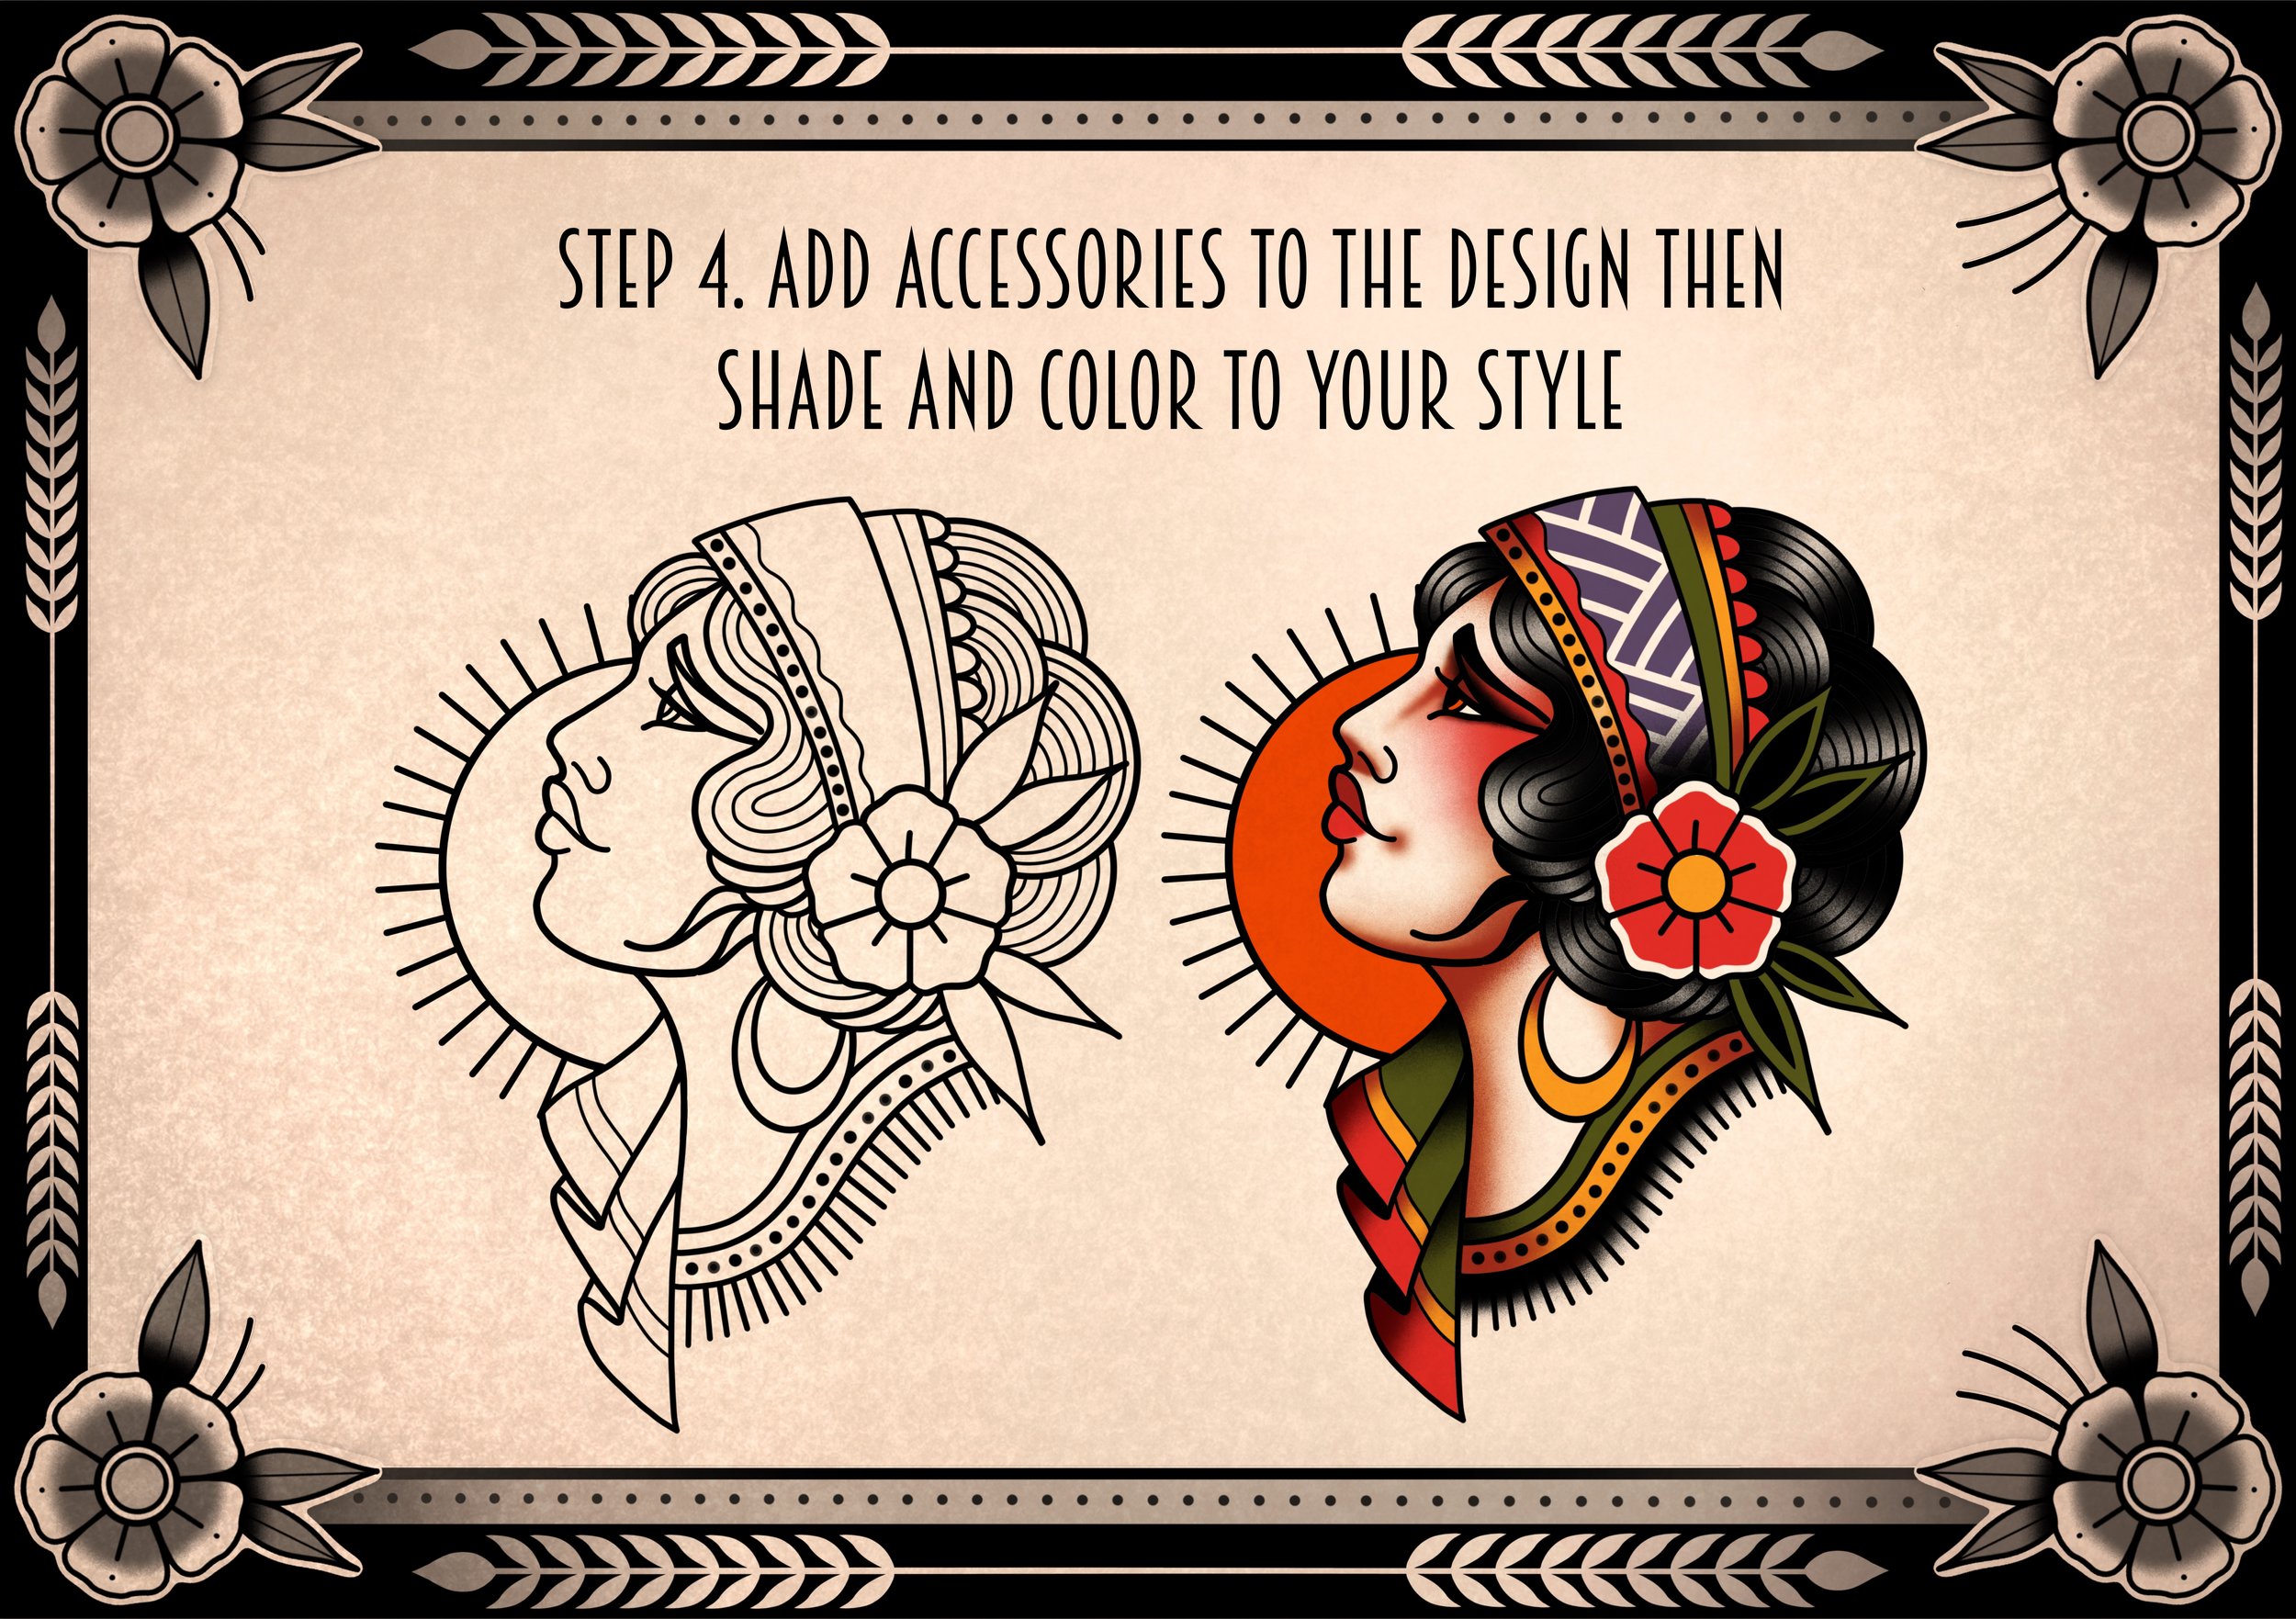 Buy Girl Head and Spiderweb American Traditional Tattoo Flash Online in  India  Etsy